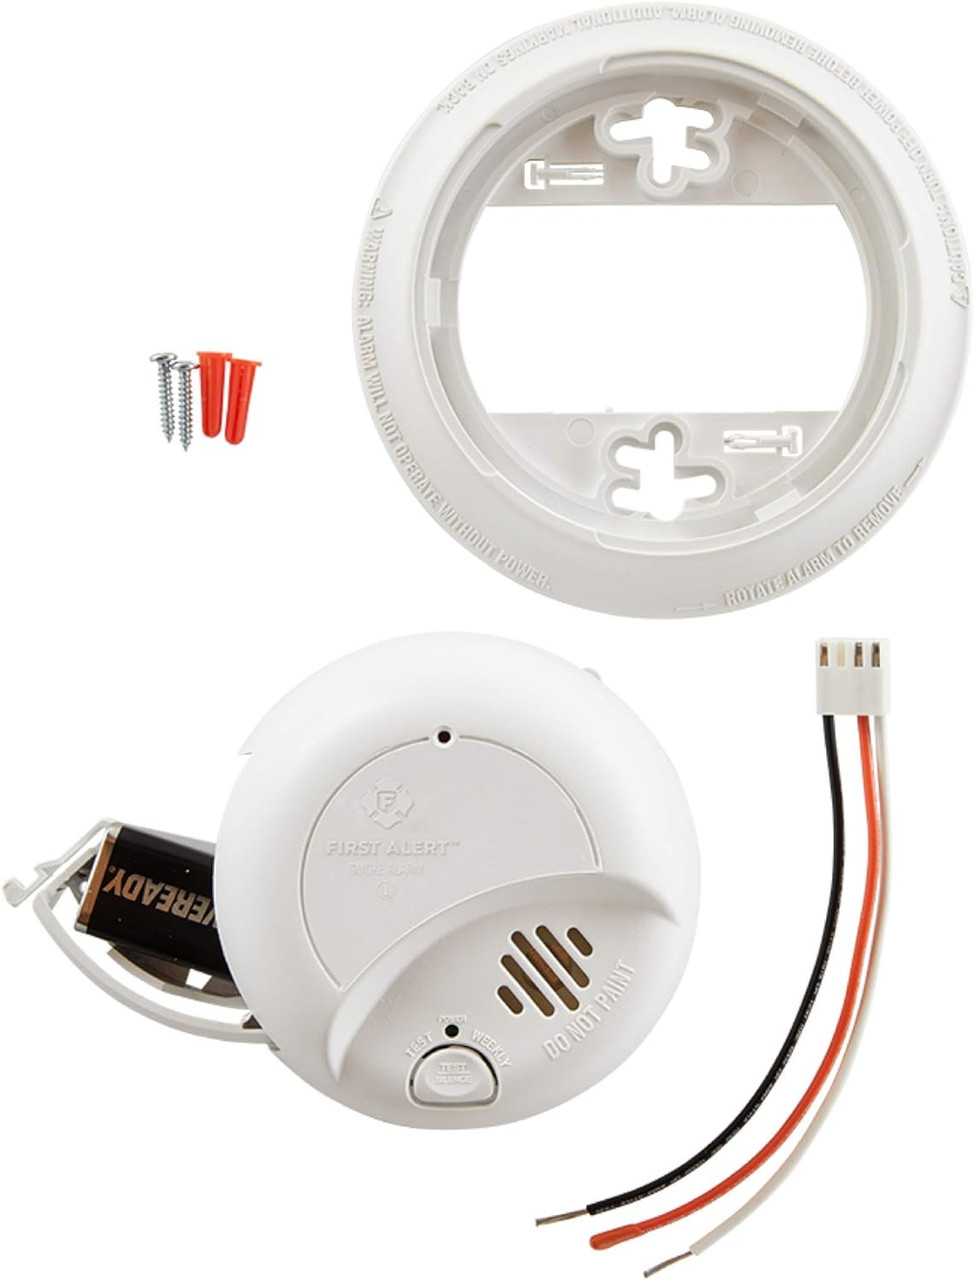 BRK First Alert 9120B - Smoke Detector - Hardwired Alarm with Battery Backup